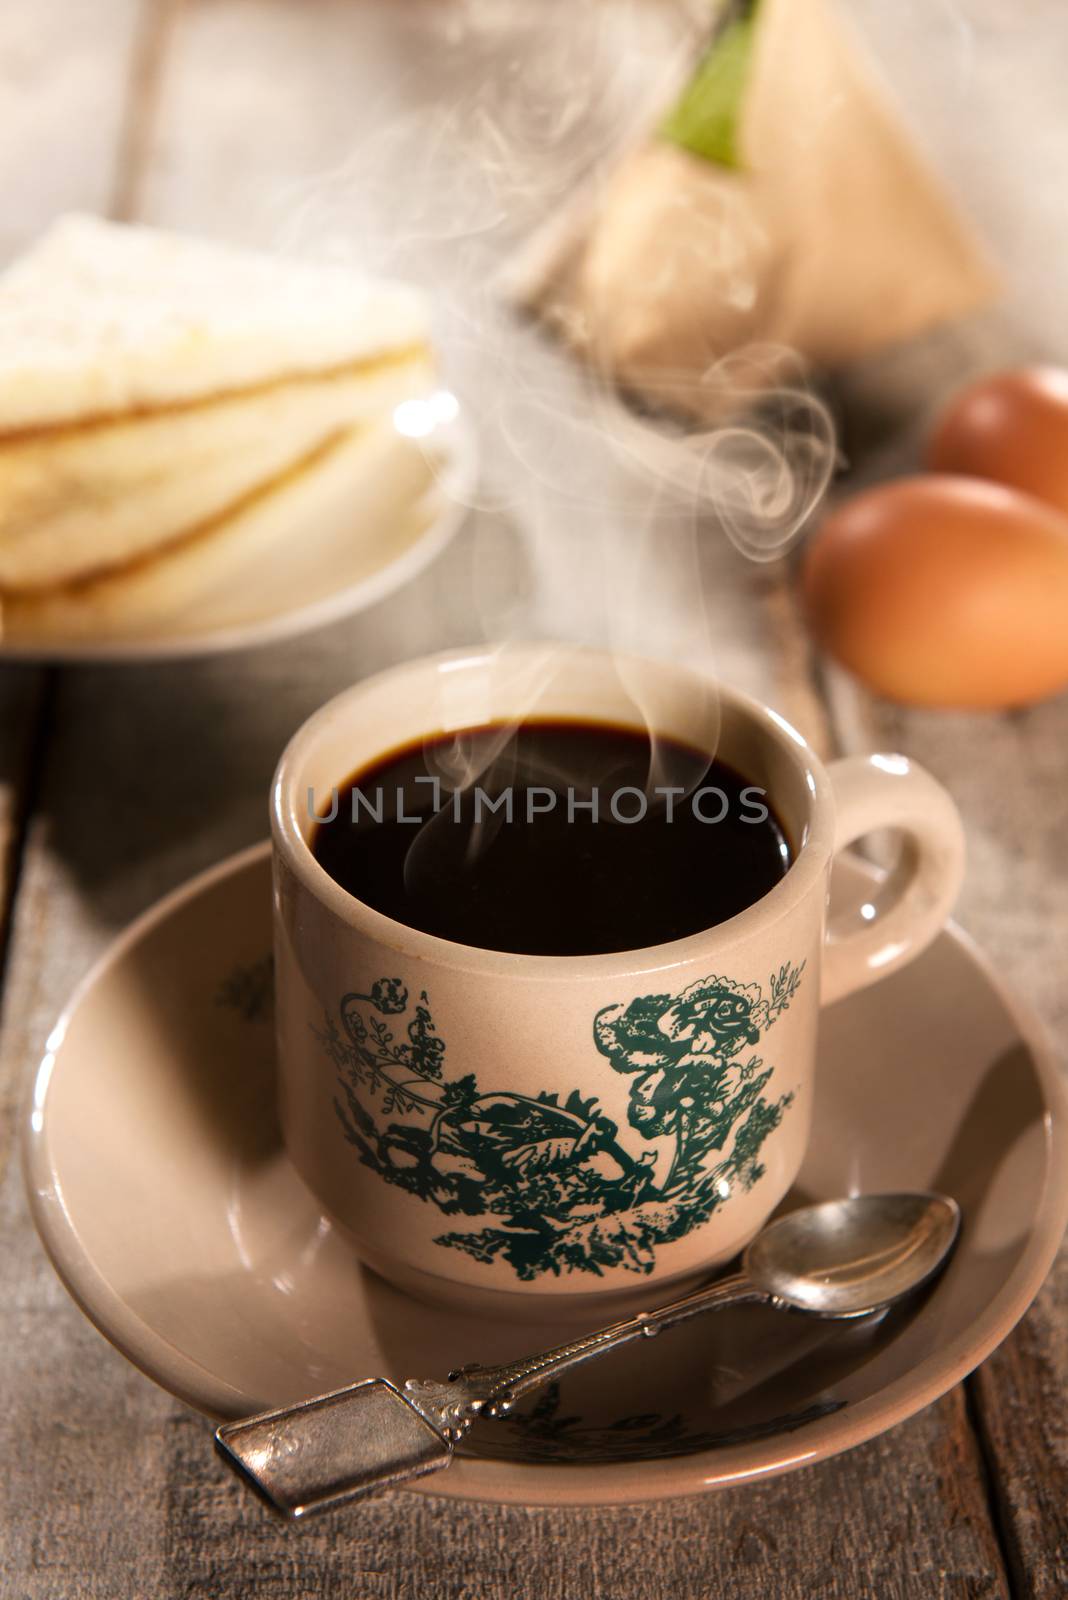 Traditional kopitiam style Malaysian coffee and breakfast with morning sunlight. Fractal on the cup is generic print. Soft focus setting with dramatic ambient light on dark wooden background.